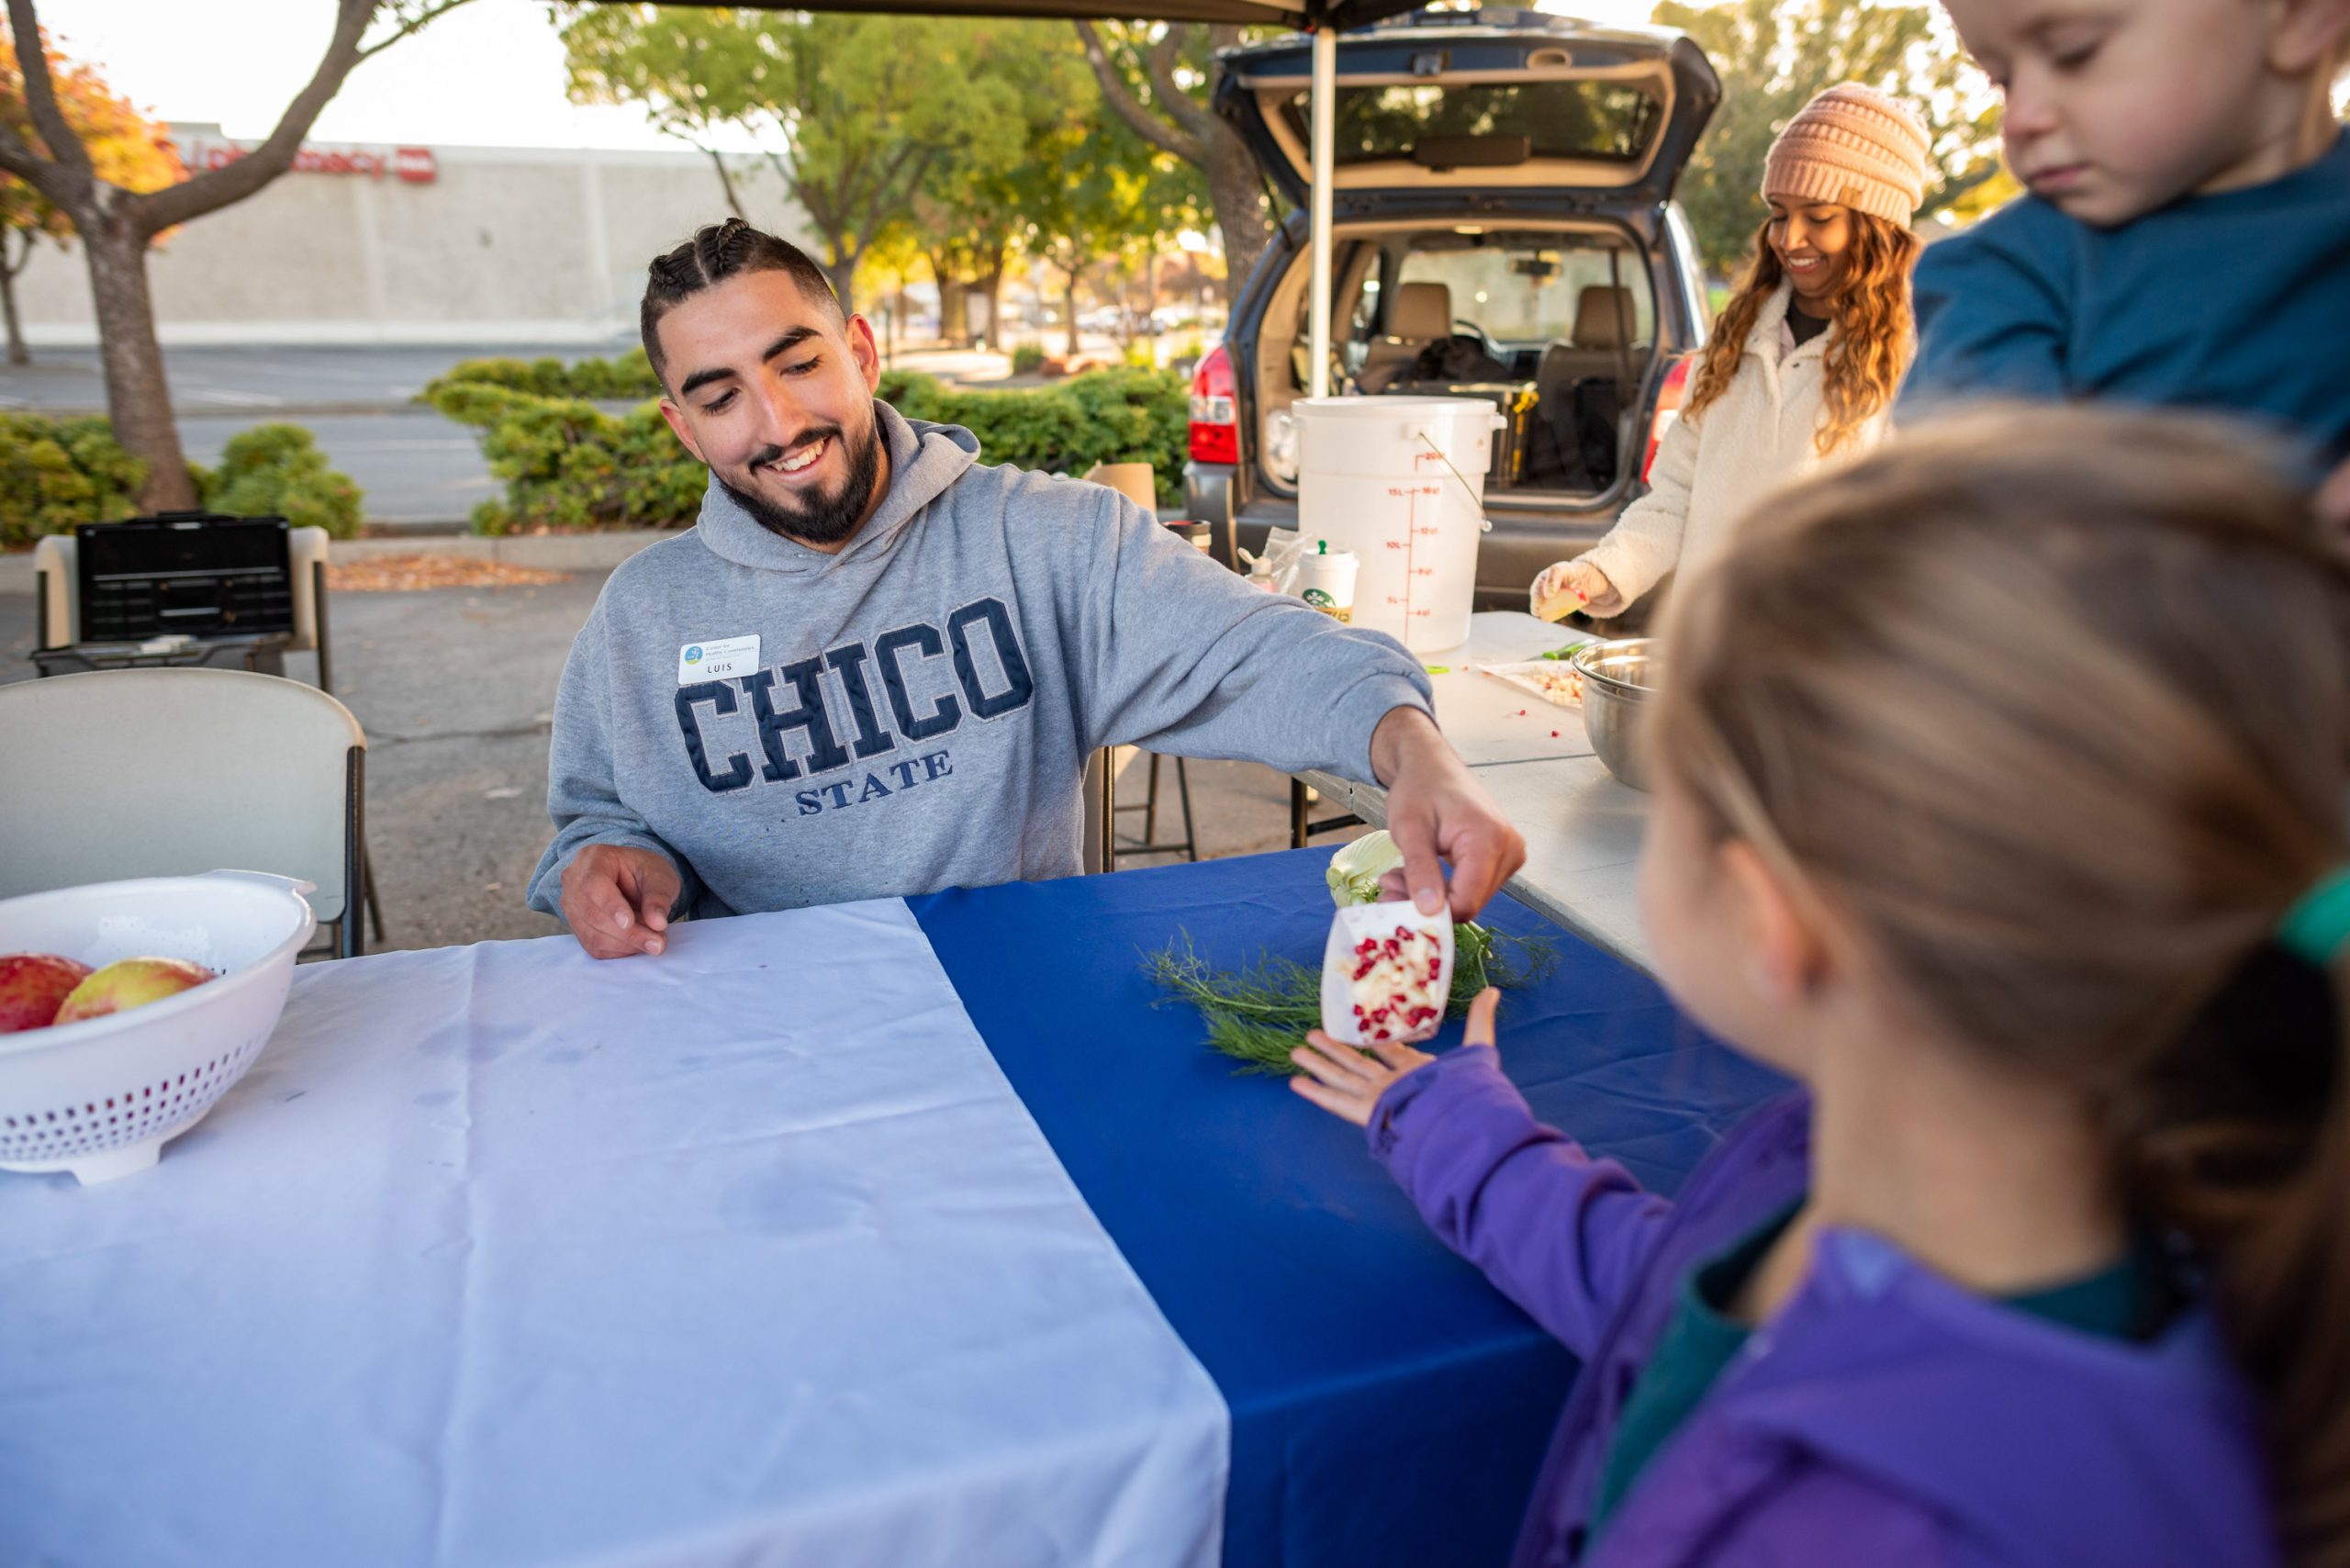 A CHC staff member giving away healthy food samples at a farmers market in Chico CA.